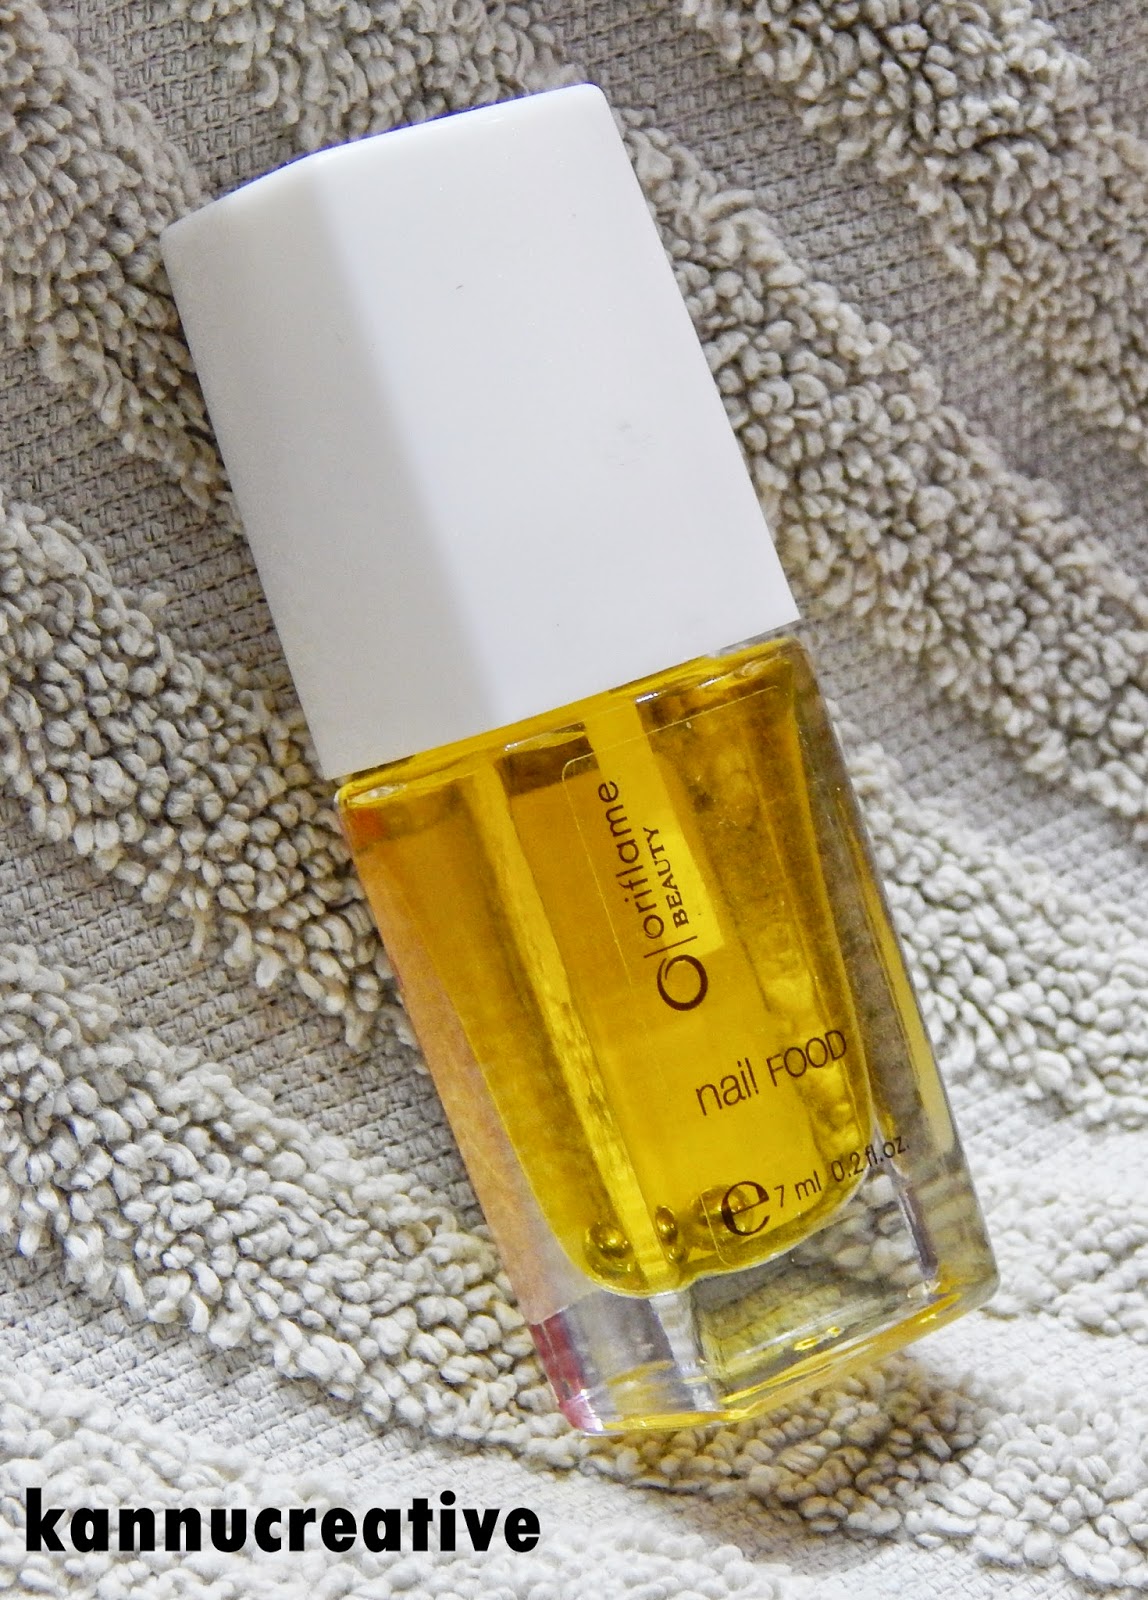 Oriflame Beauty Nail Food: Review + NOTD